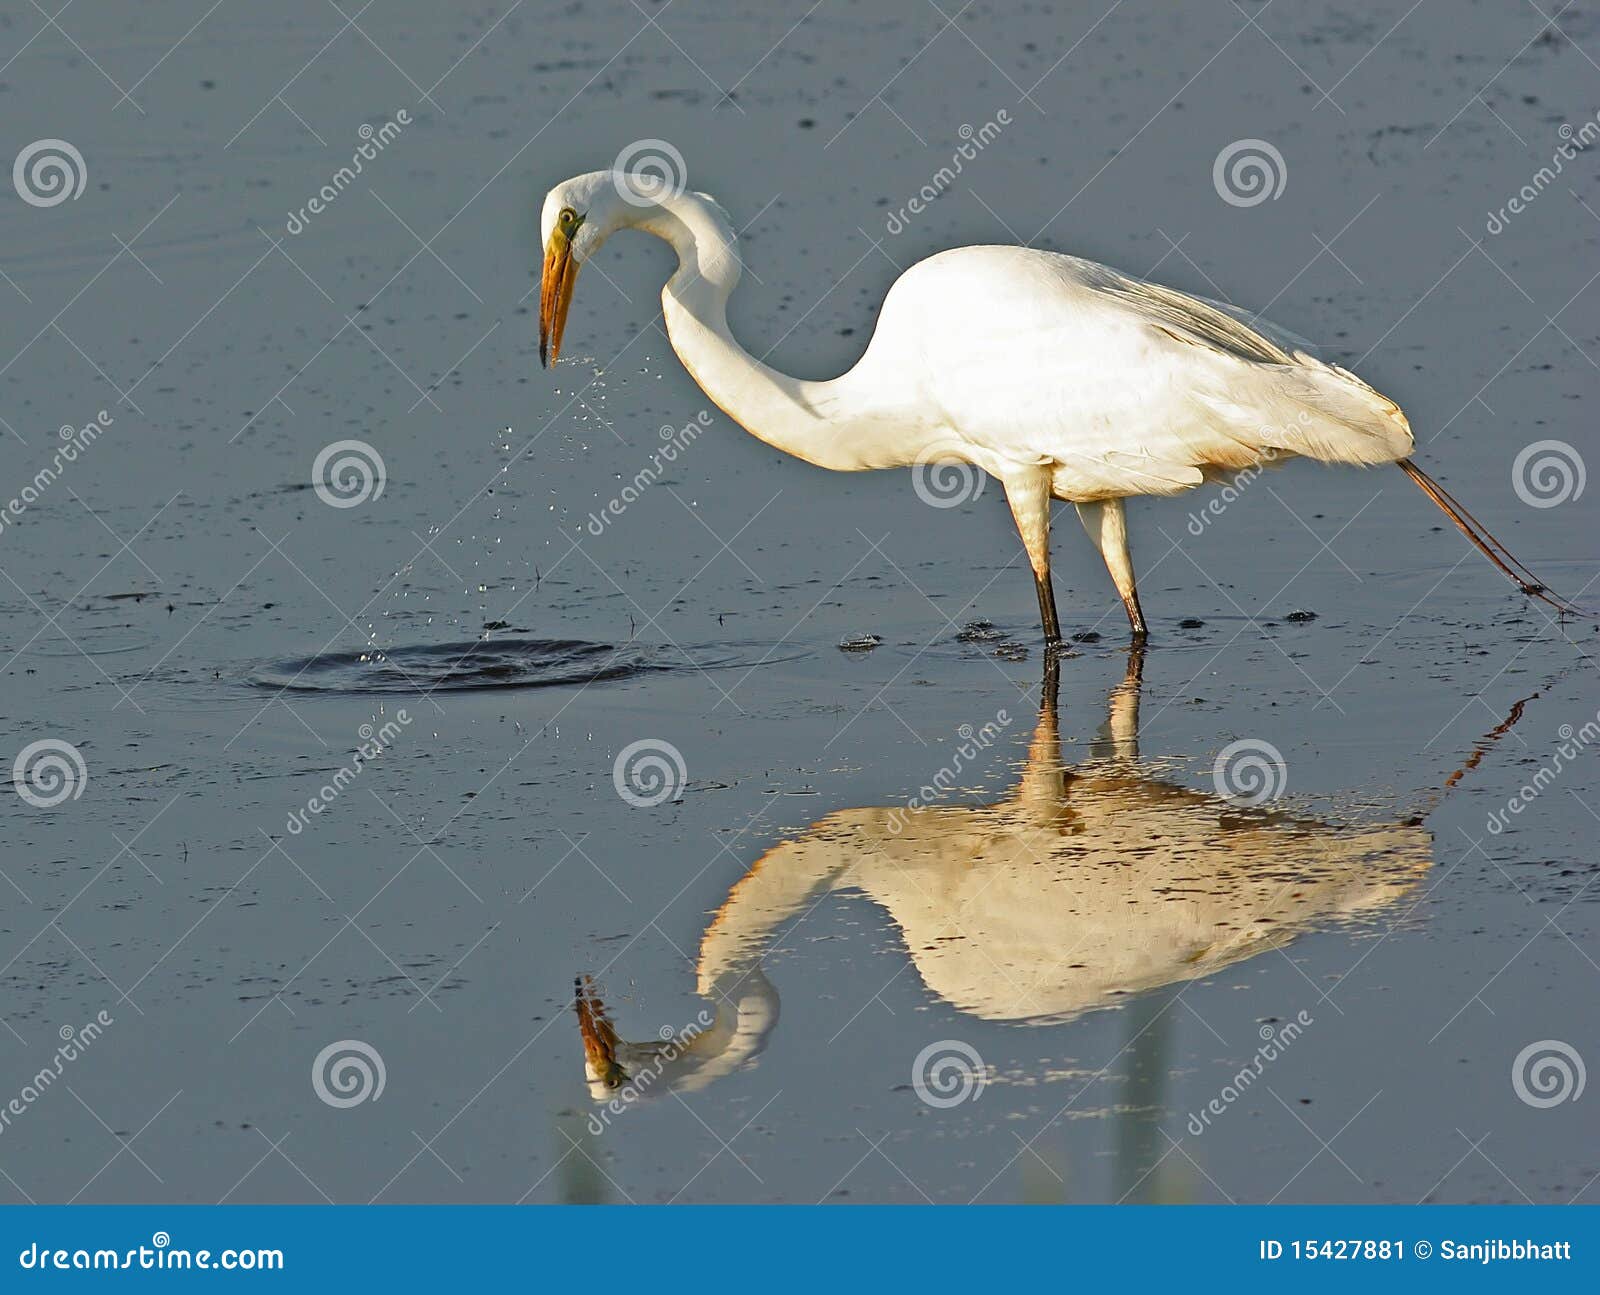 Great Egret Standing in Water Stock Image - Image of water, animal ...